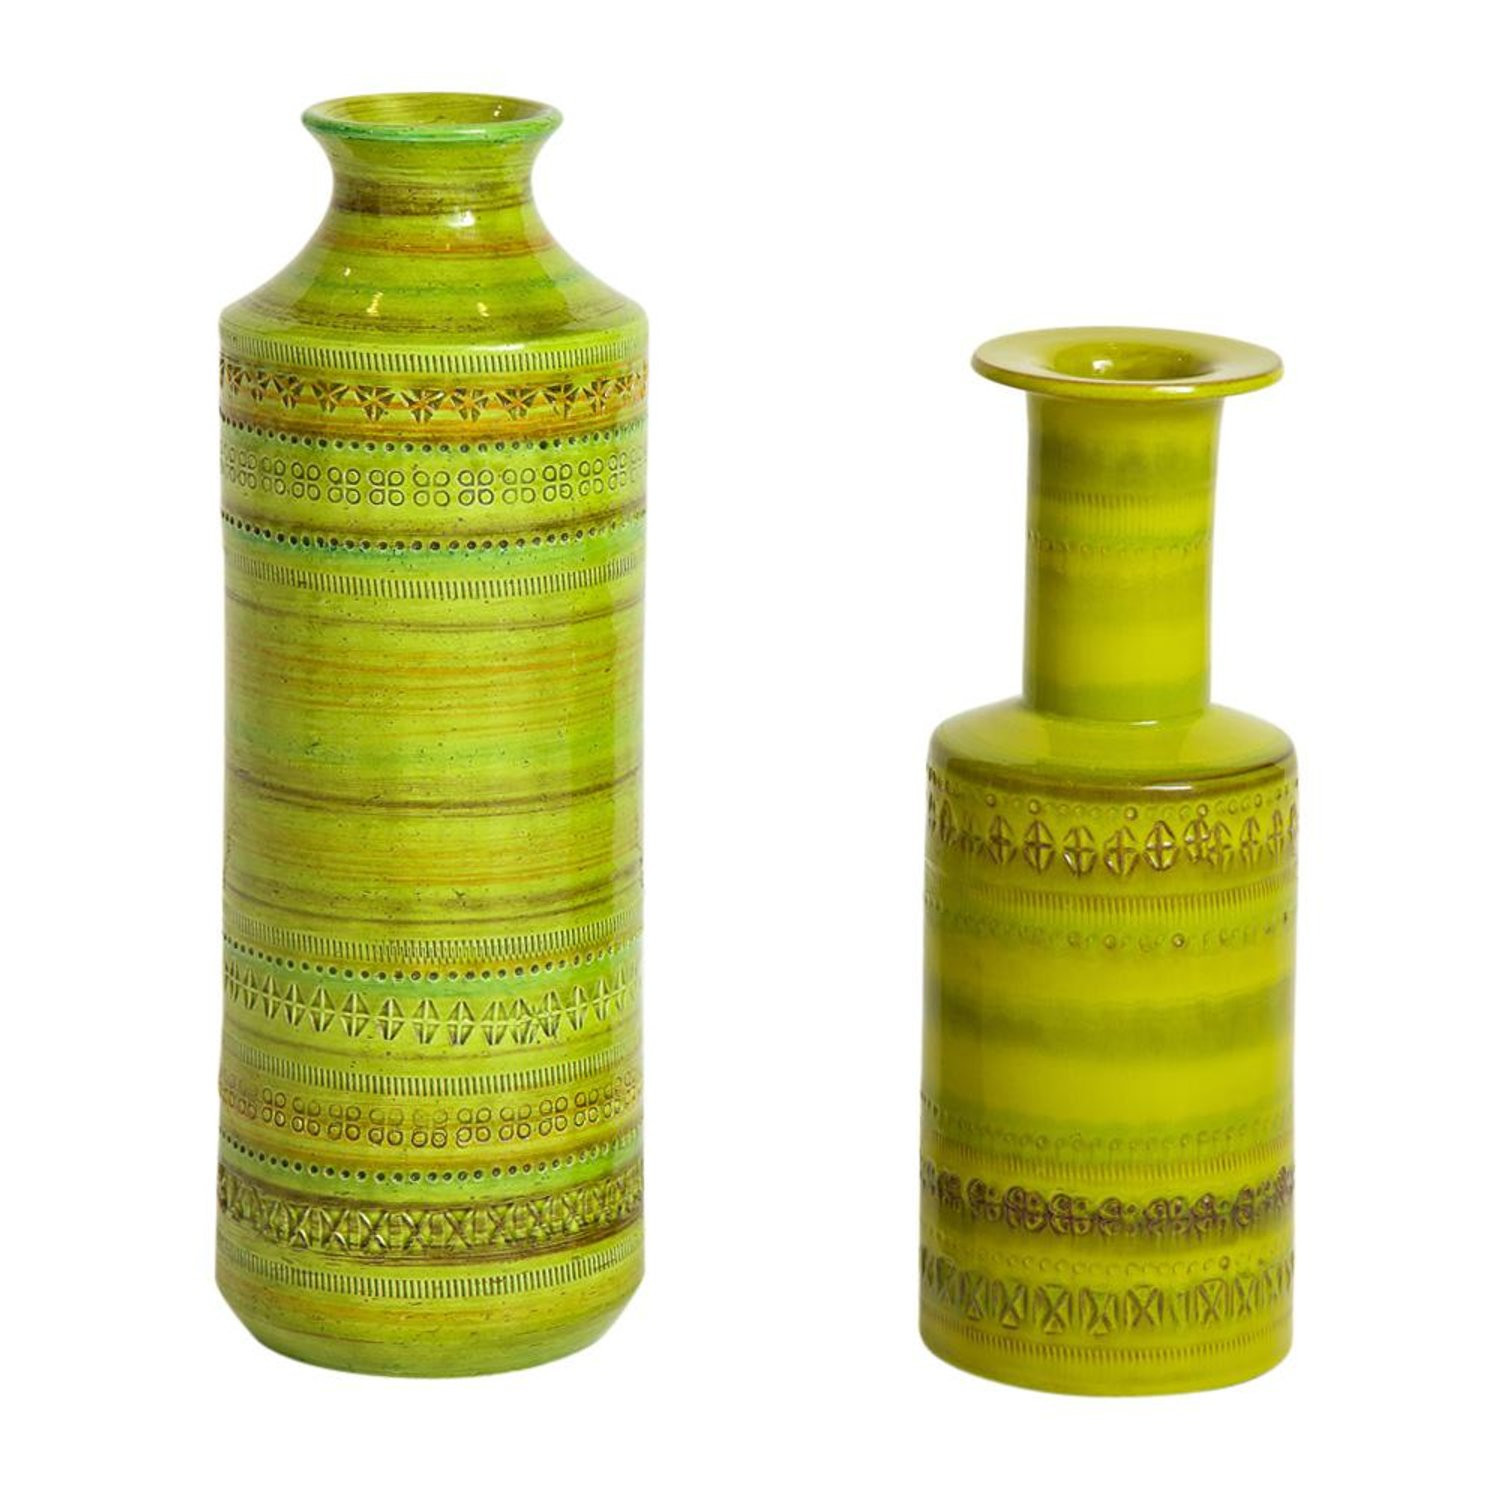 22 Unique 5 Glass Cylinder Vase 2024 free download 5 glass cylinder vase of bitossi ceramic vase rosenthal netter chartreuse signed italy 1960s pertaining to bitossi ceramic vase rosenthal netter chartreuse signed italy 1960s for sale at 1st